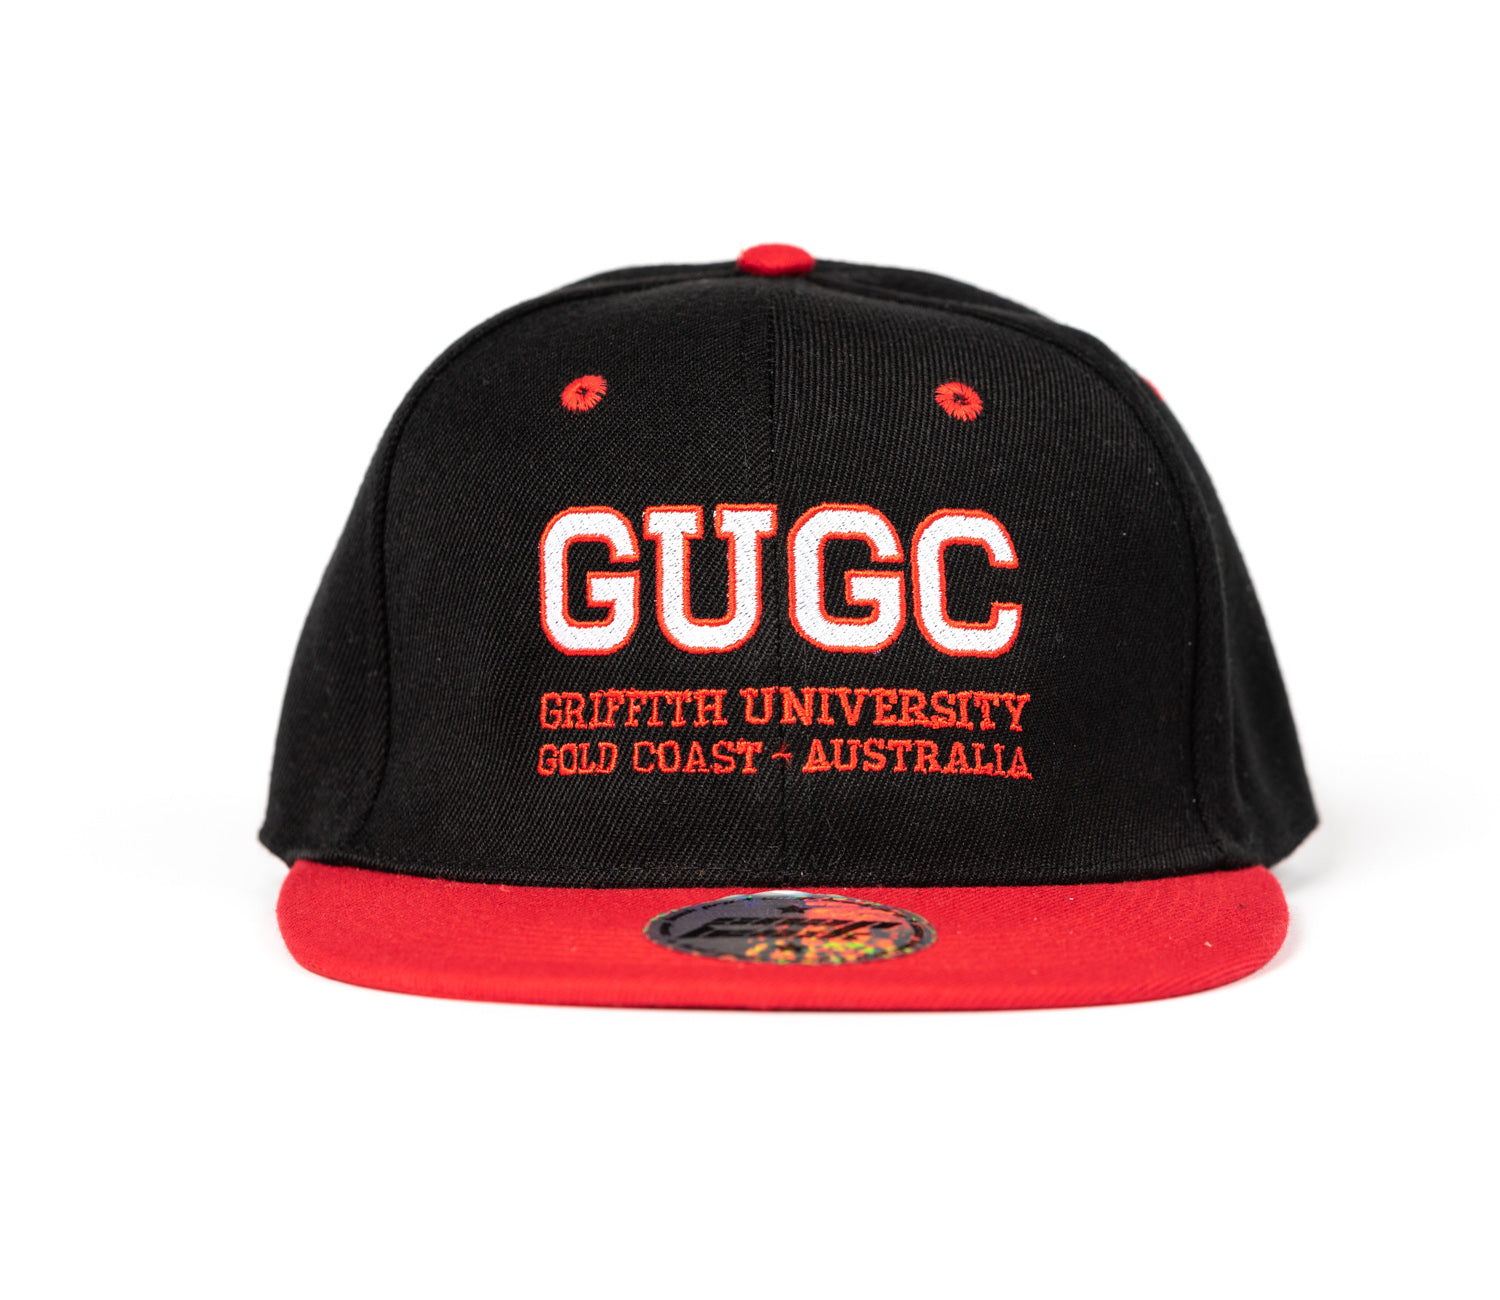 Griffith embroidered snap back cap